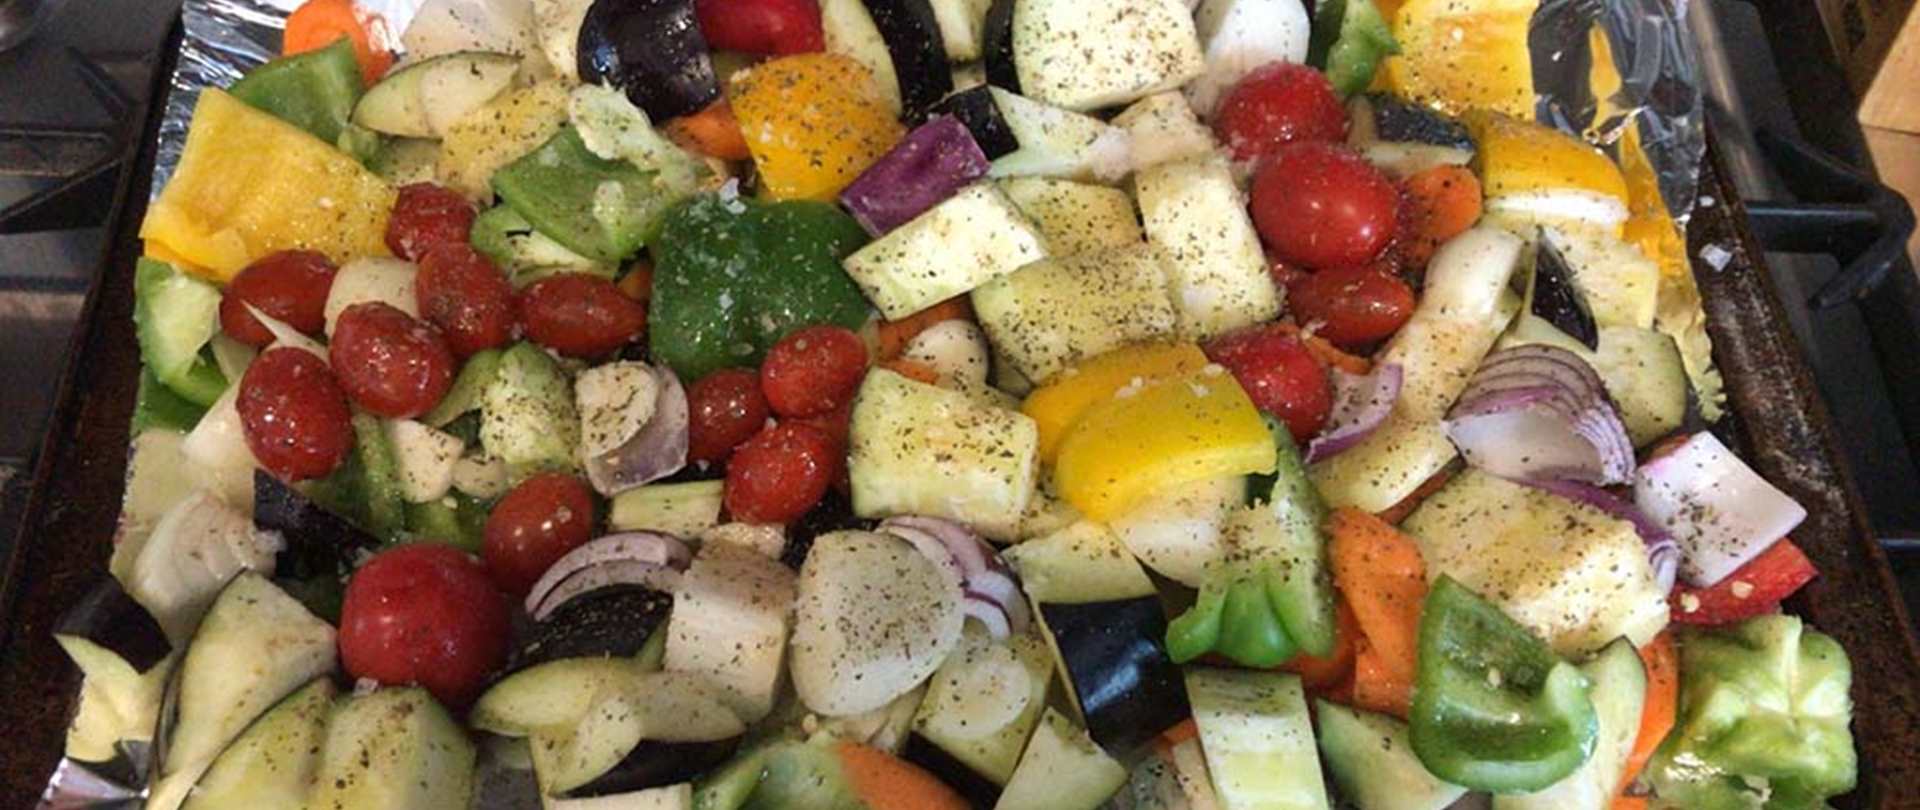 Roasted vegetables ready to go into the oven